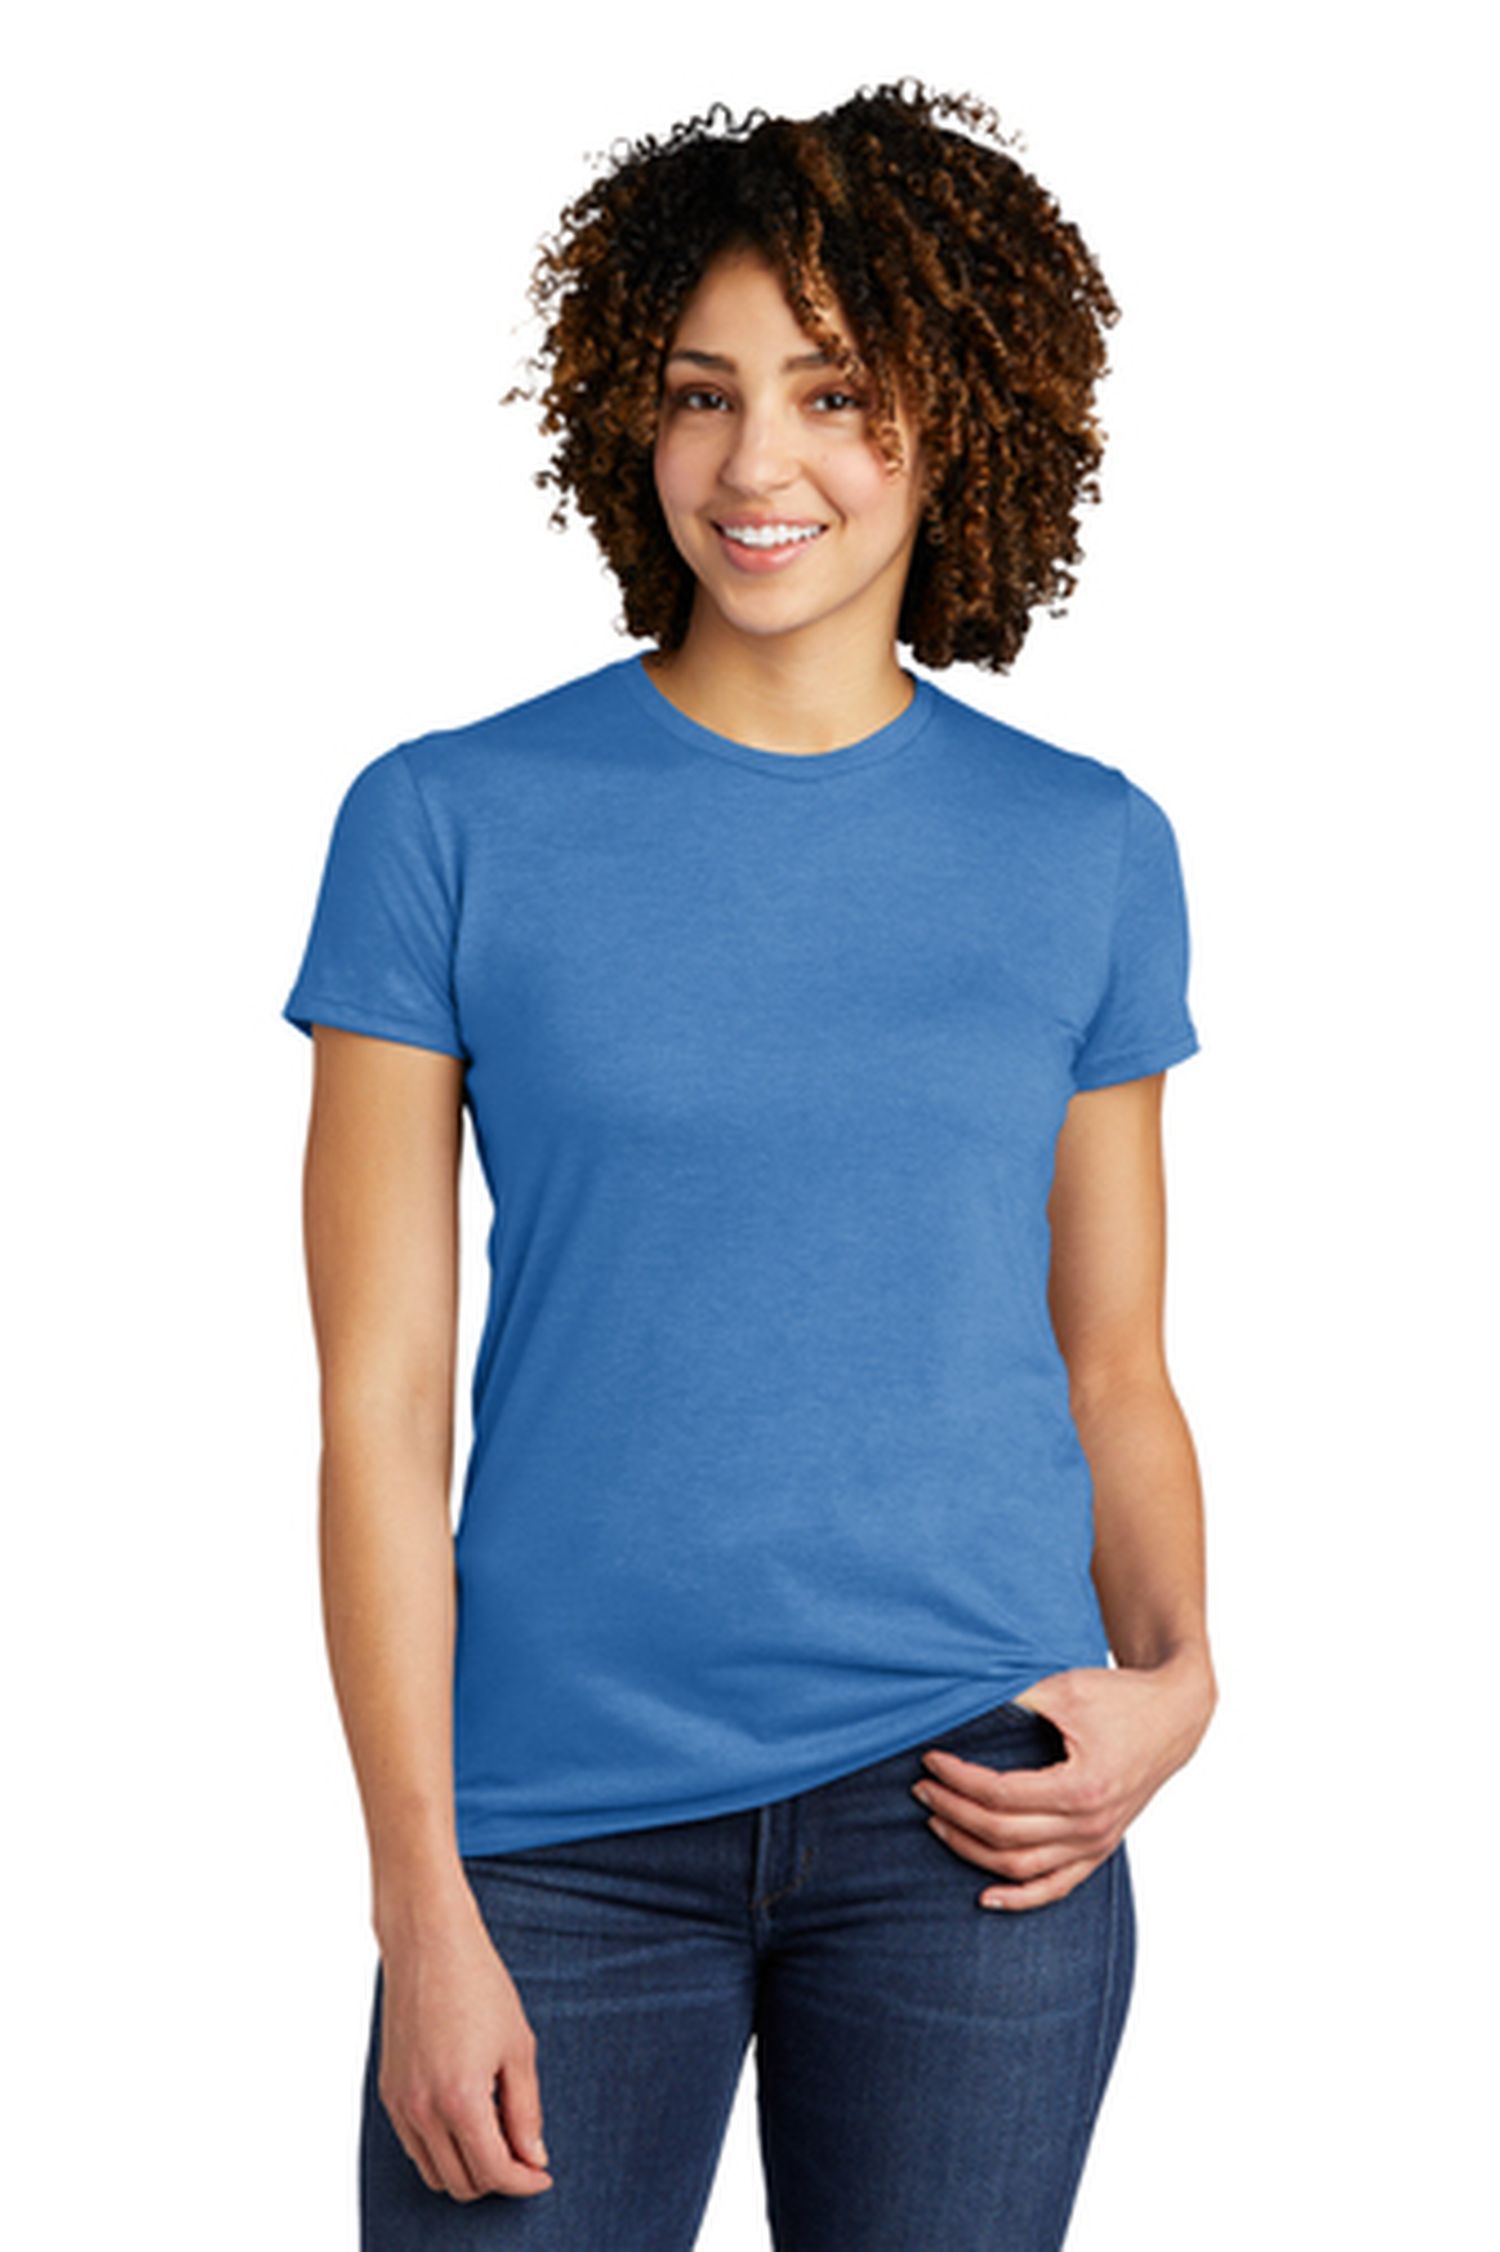 Allmade ® Ladies 4.2-ounce, 50% recycled polyester, 25% organic cotton, 25% modal Tri-Blend T-shirt